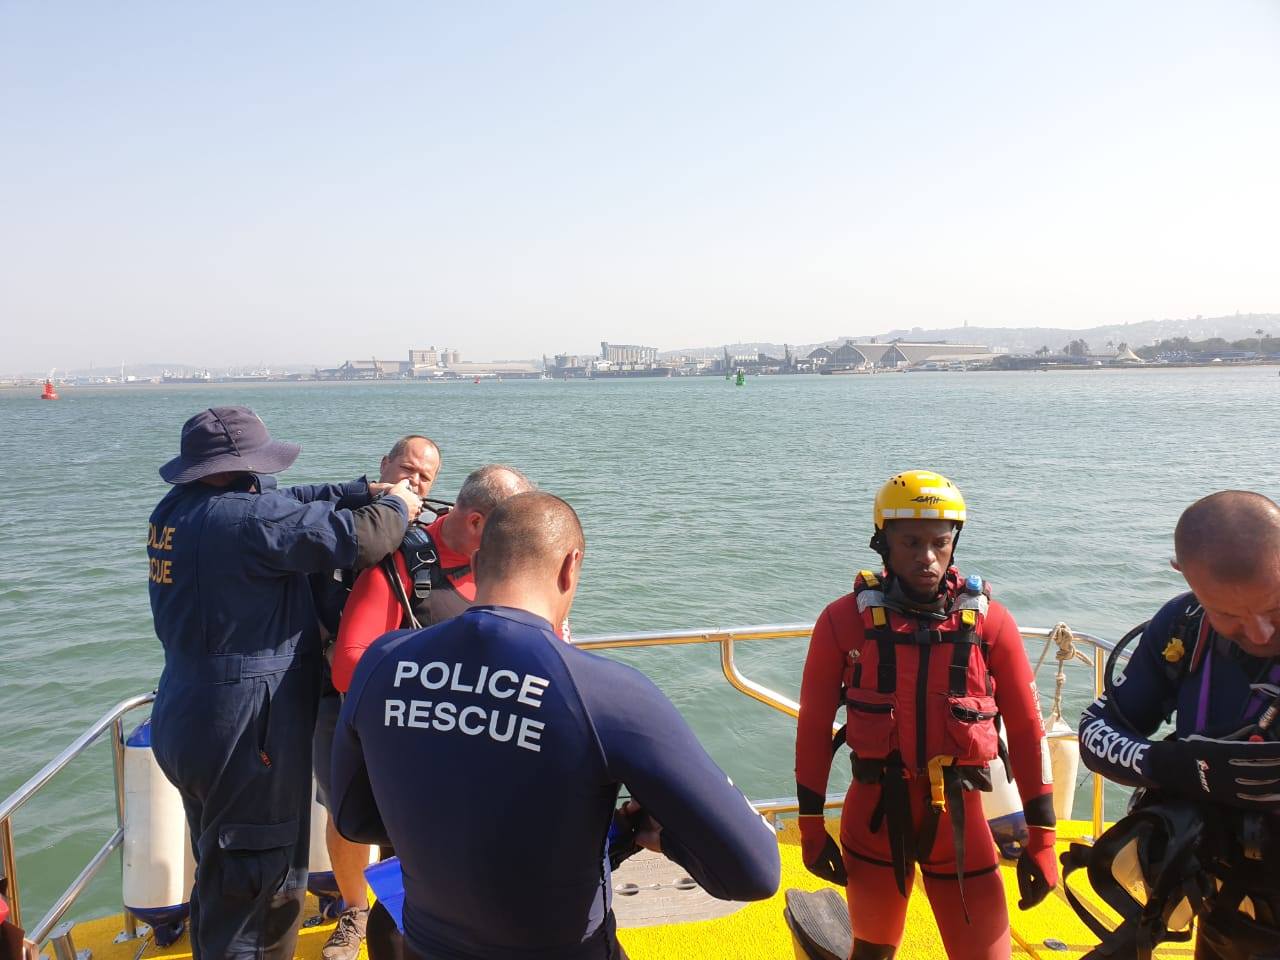 Police divers in Search and Rescue in the channel near Wilson's Wharf, Durban